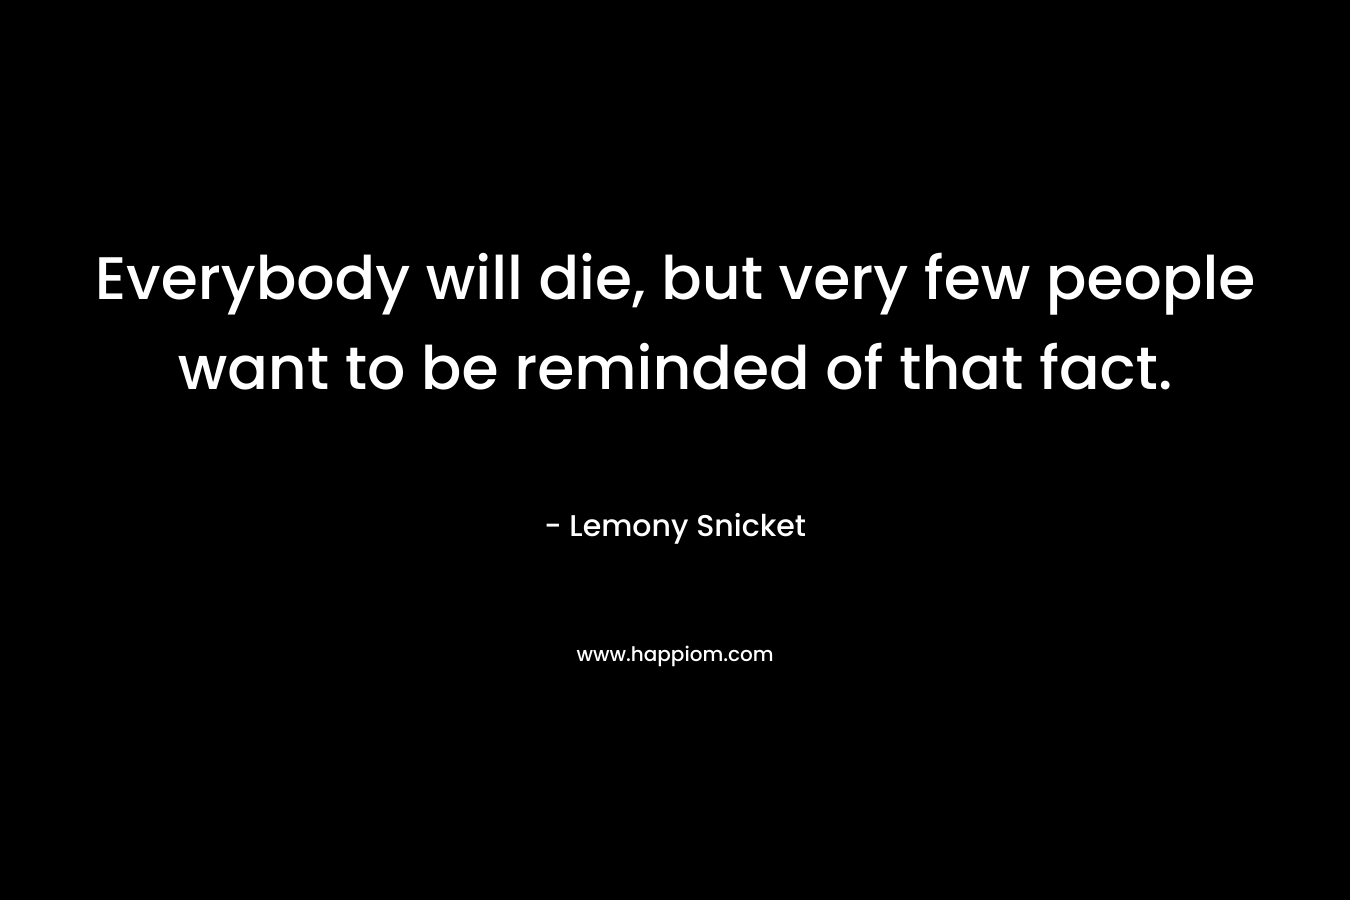 Everybody will die, but very few people want to be reminded of that fact. – Lemony Snicket